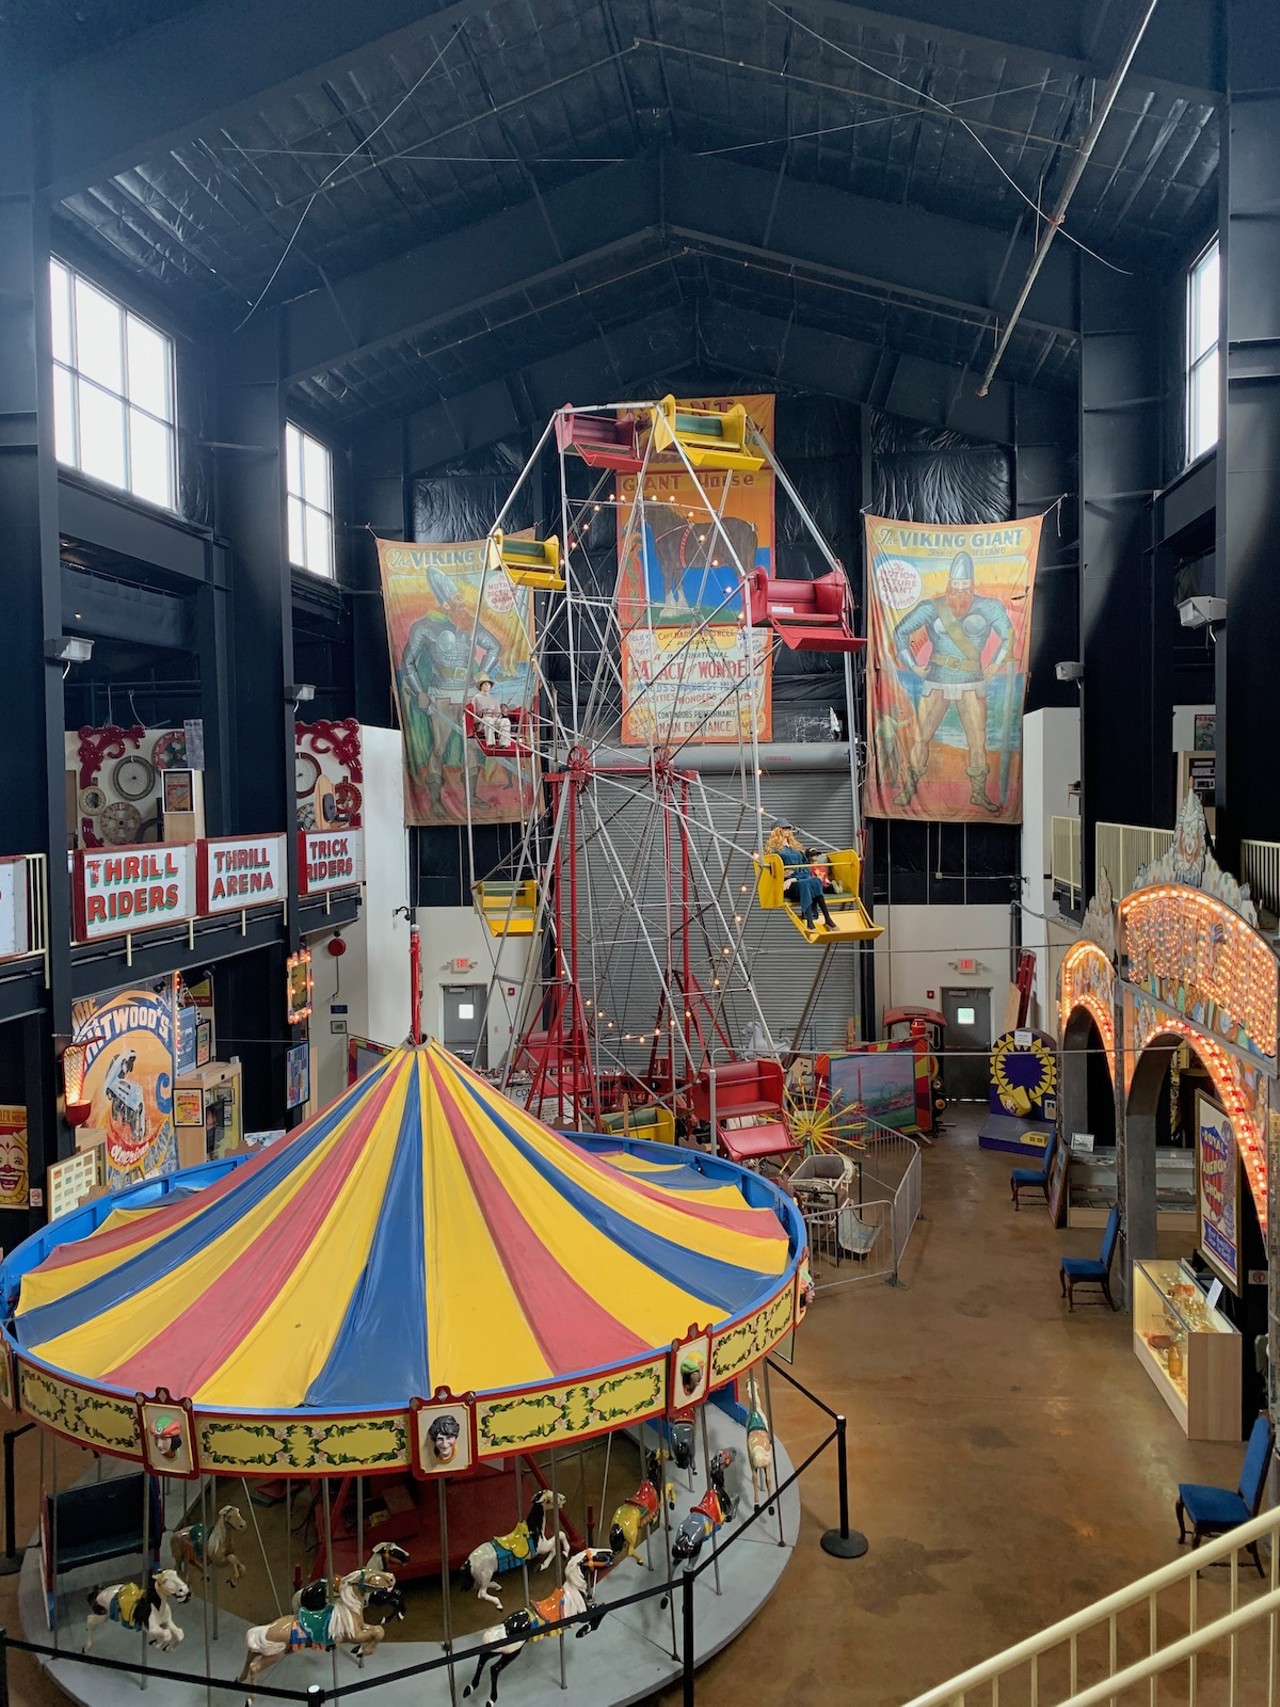 Step right up to the Carnival Museum6938 Riverview Dr, Riverview. (813) 671-3503 Head to Riverview to see 54,000-square feet of carnival history at the International Independent Showman's Museum. You'll find an old ferris wheel, a costume from Gypsy Rose Lee, and a lot of clowns.